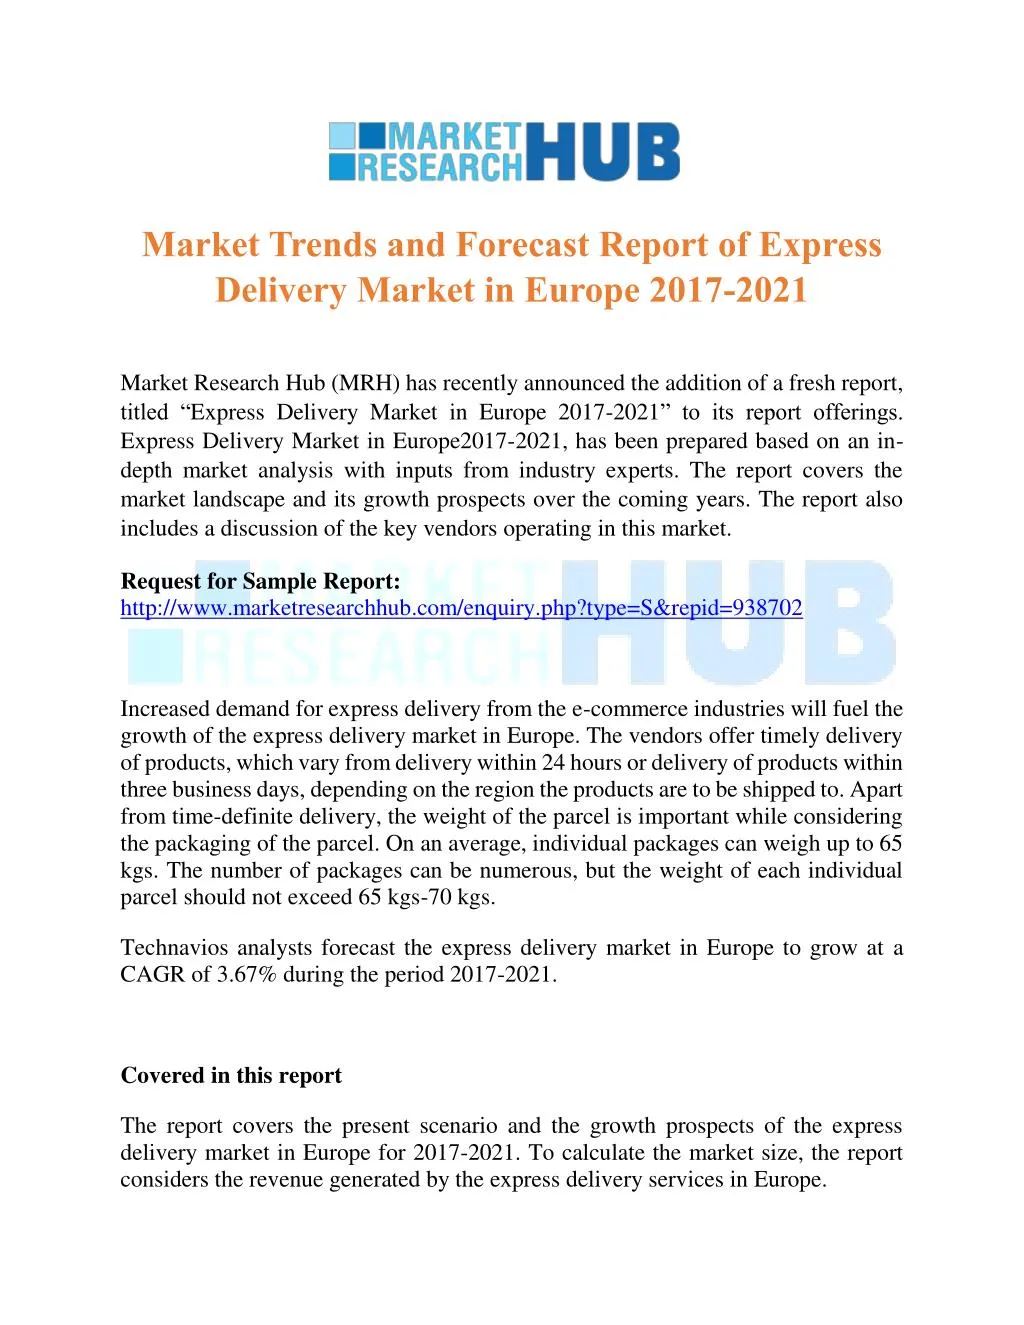 market trends and forecast report of express